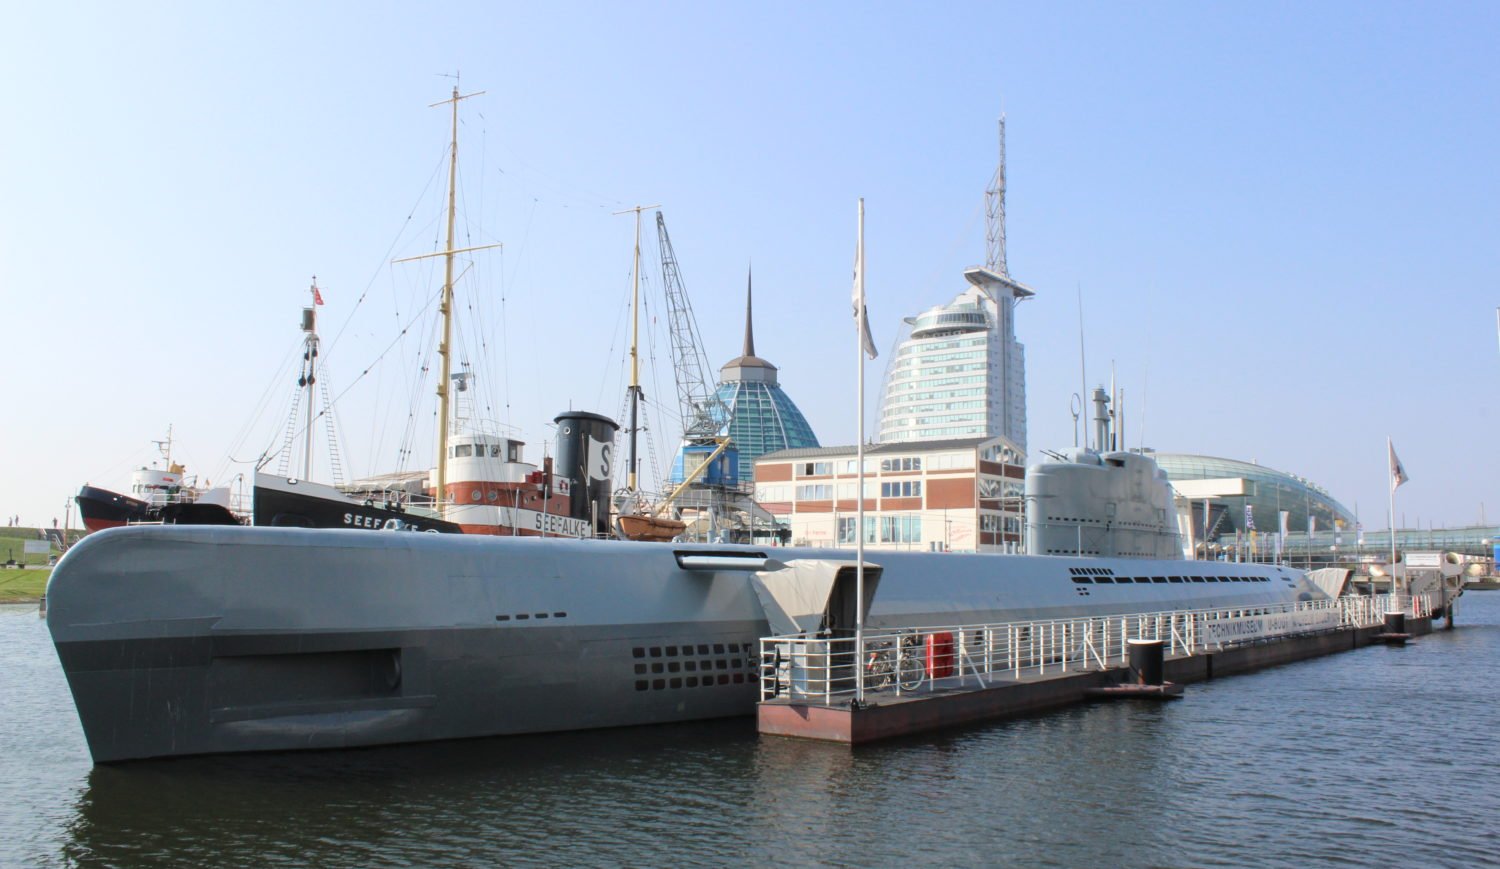 In the middle of Bremerhaven's museum harbor lies the Wilhelm Bauer: a submarine that was built during World War II but never saw wartime action